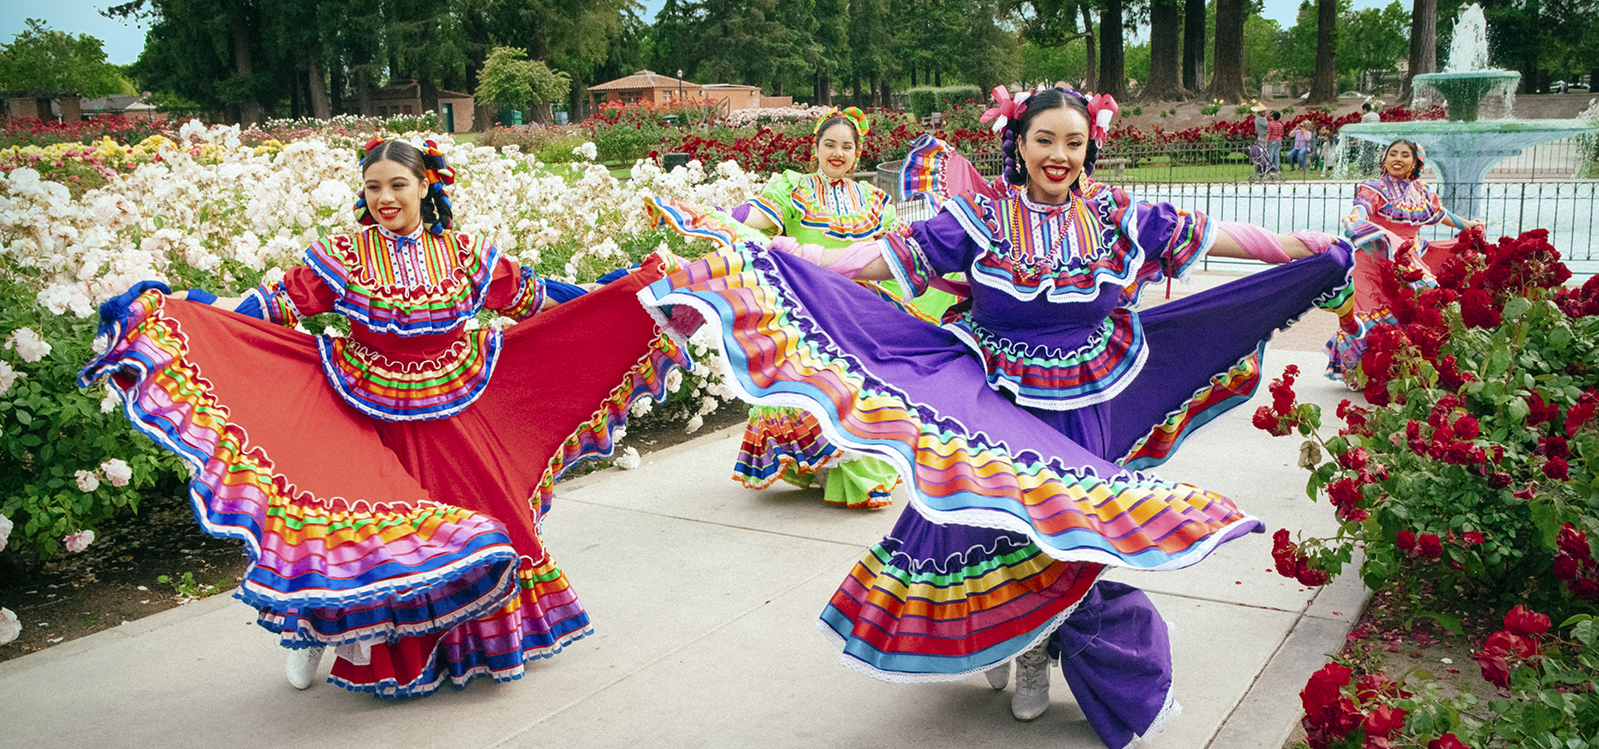 Dancers in tradition Mexican dresses dancing among thousands of rose buds in the Municipal Rose Garden.